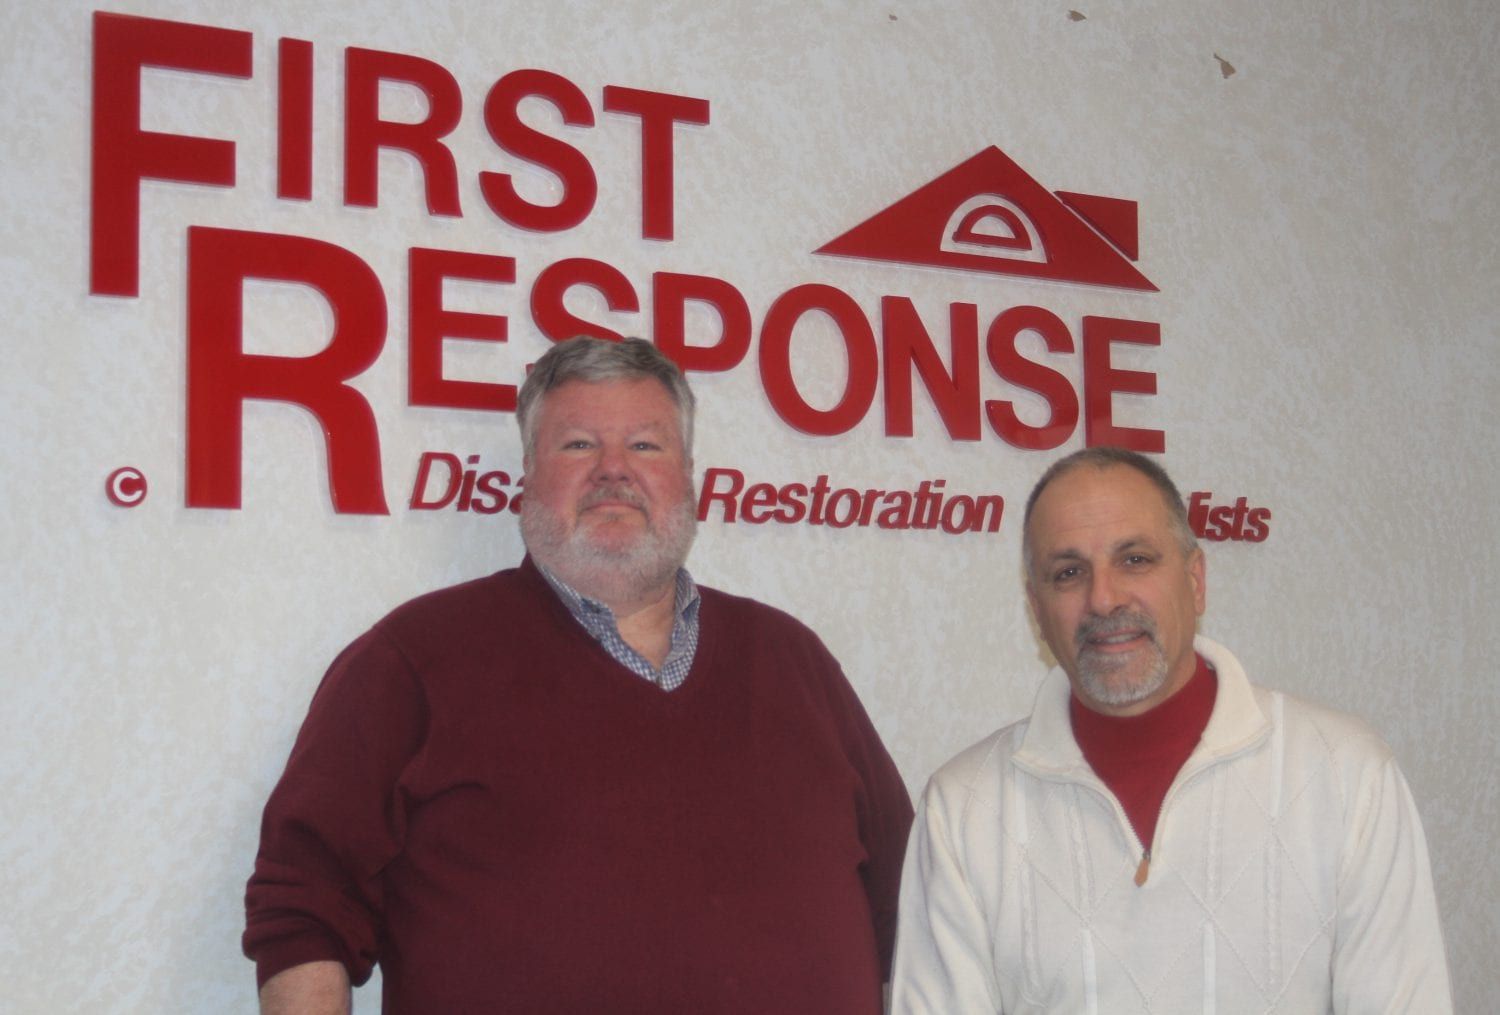 First Response Disaster Restoration Specialists